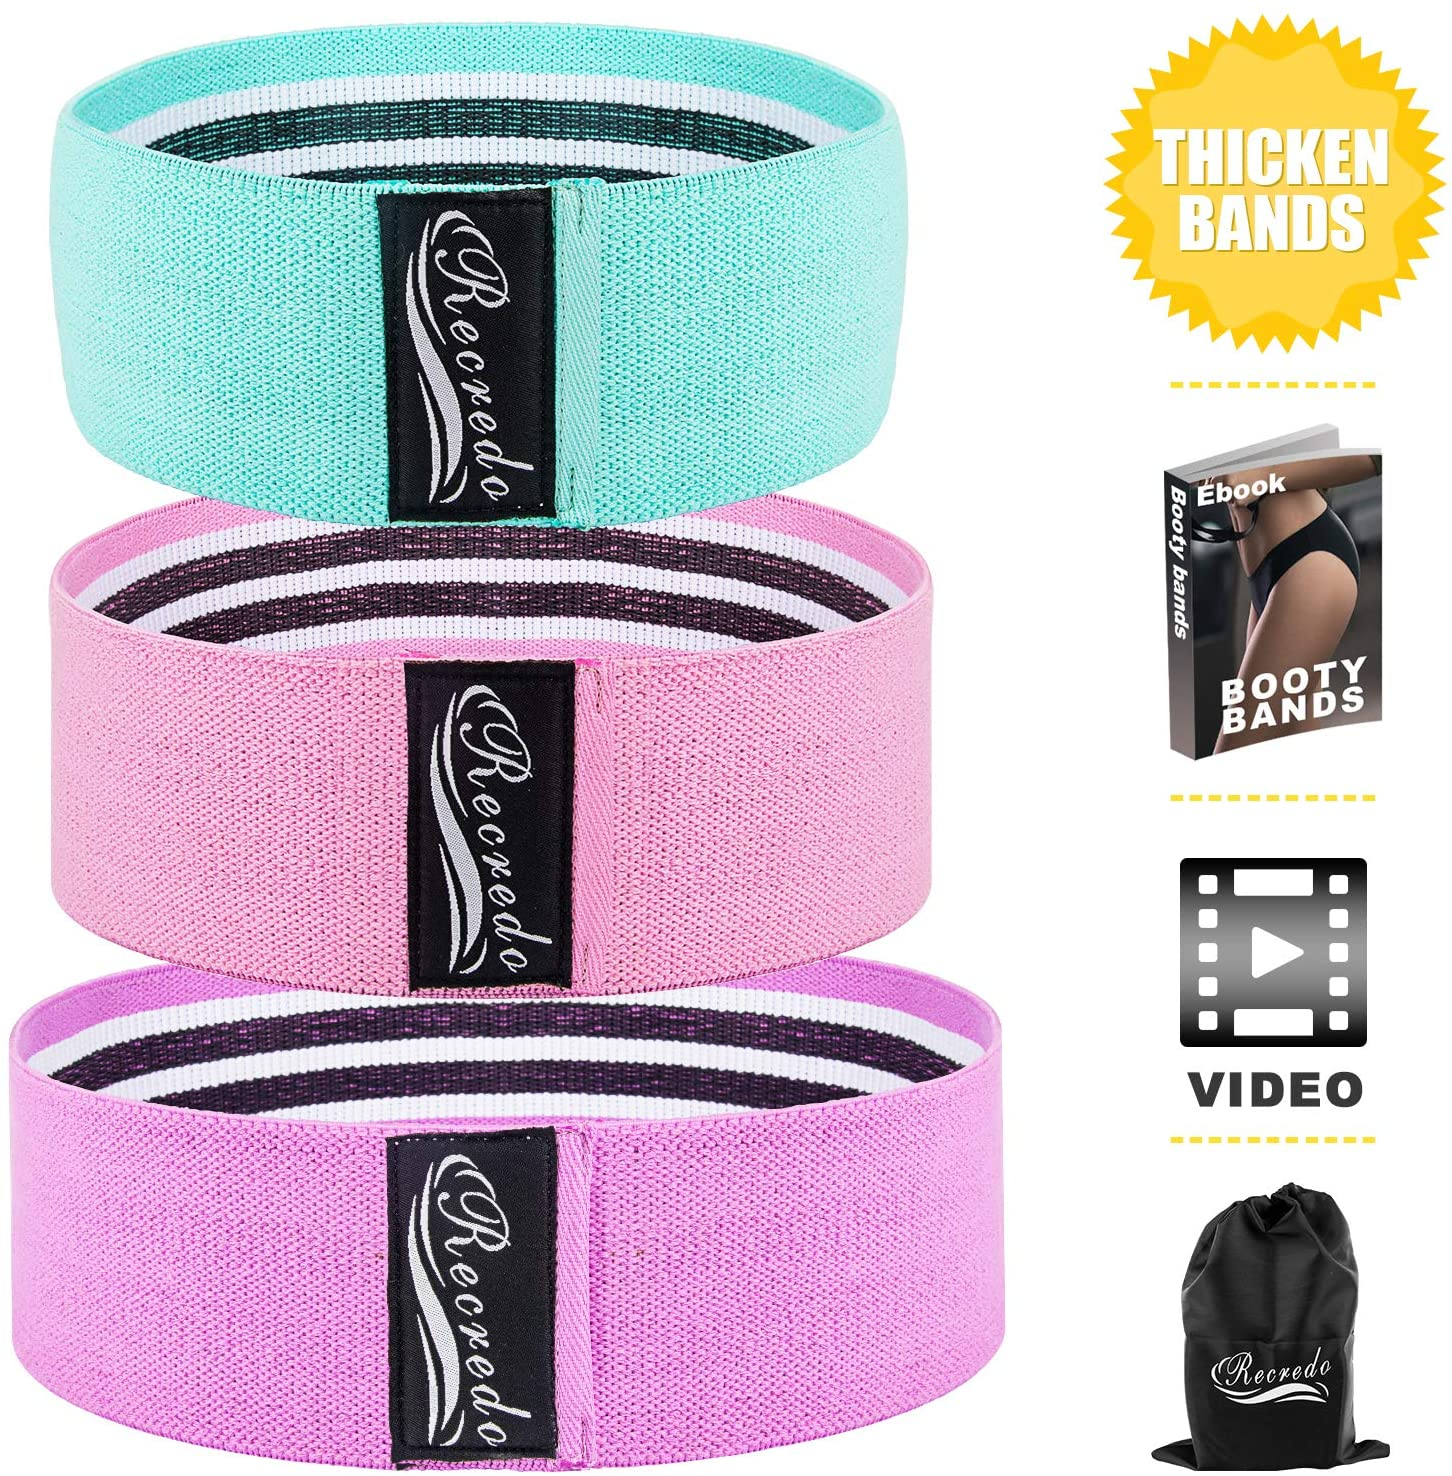 Recredo Booty Bands are thicker and more comfortable with 3 workout loop bands in three different sizes and resistances